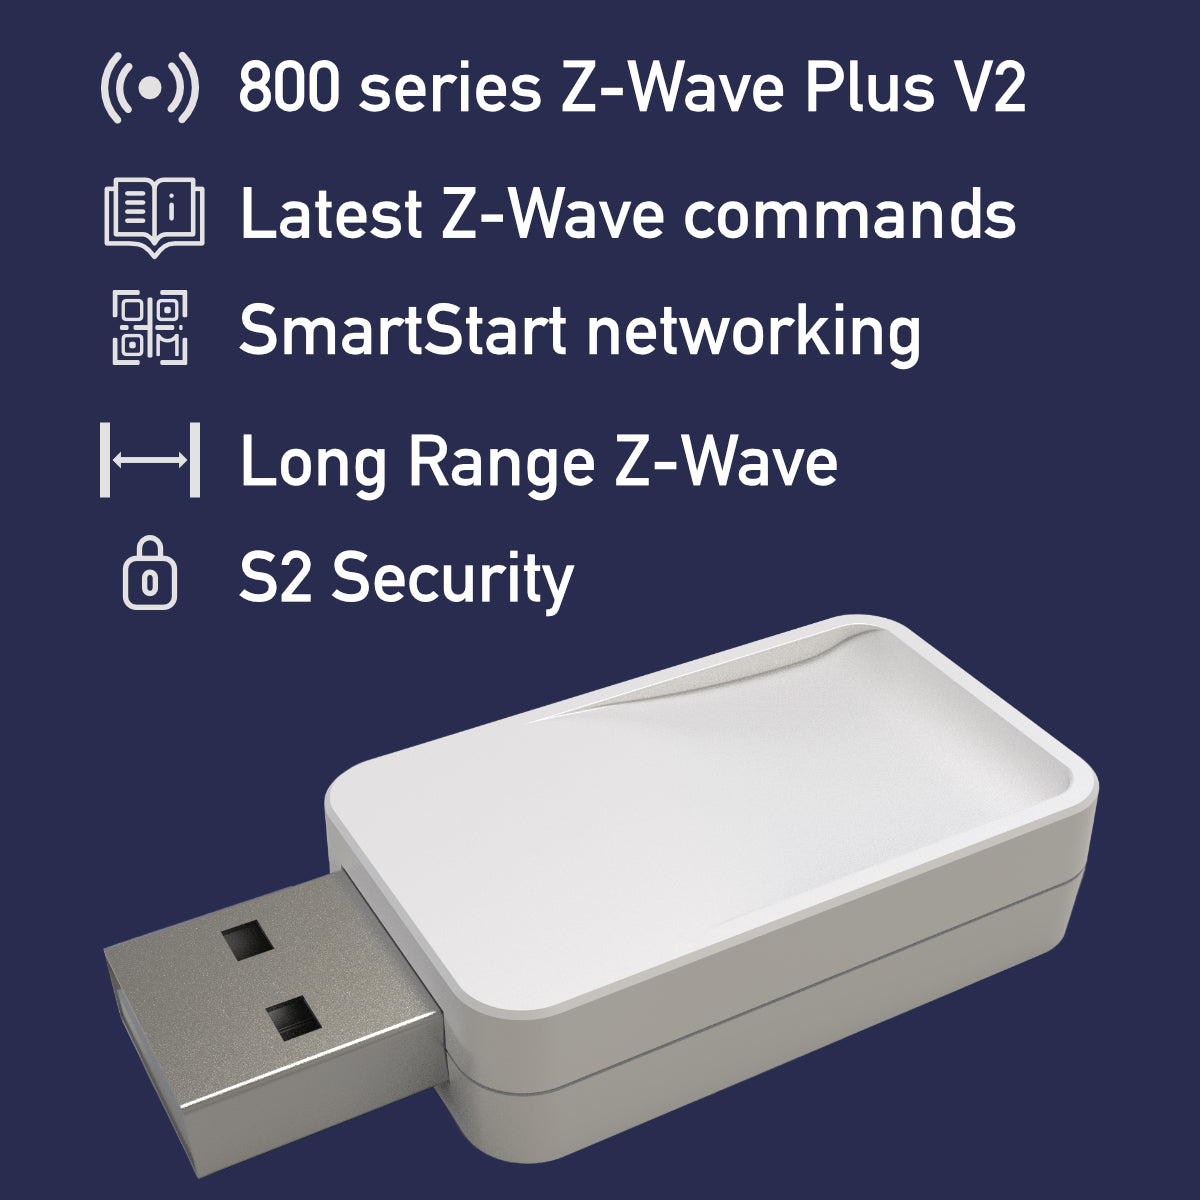 z-wave 800 series features